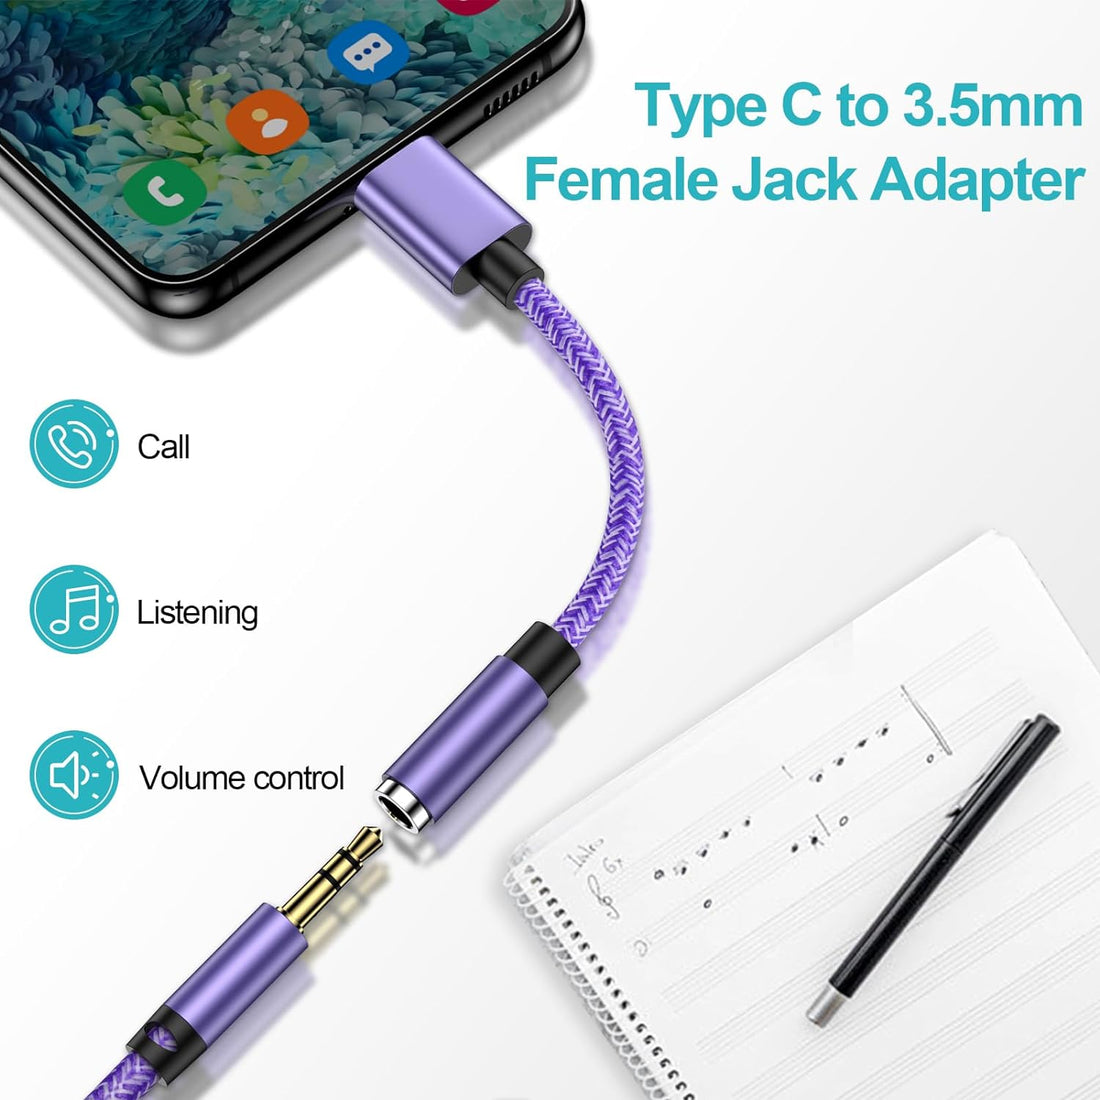 USB Type C to 3.5mm Female Headphone Jack Adapter for Samsung Galaxy S23 Ultra S22Ultra S24 A54 A14 A34 A13 S10 S9 S21 S22 Plus, Google Pixel 7a 7Pro 7 6 5, iPad air, USB C Dongle AUX Cord for Android